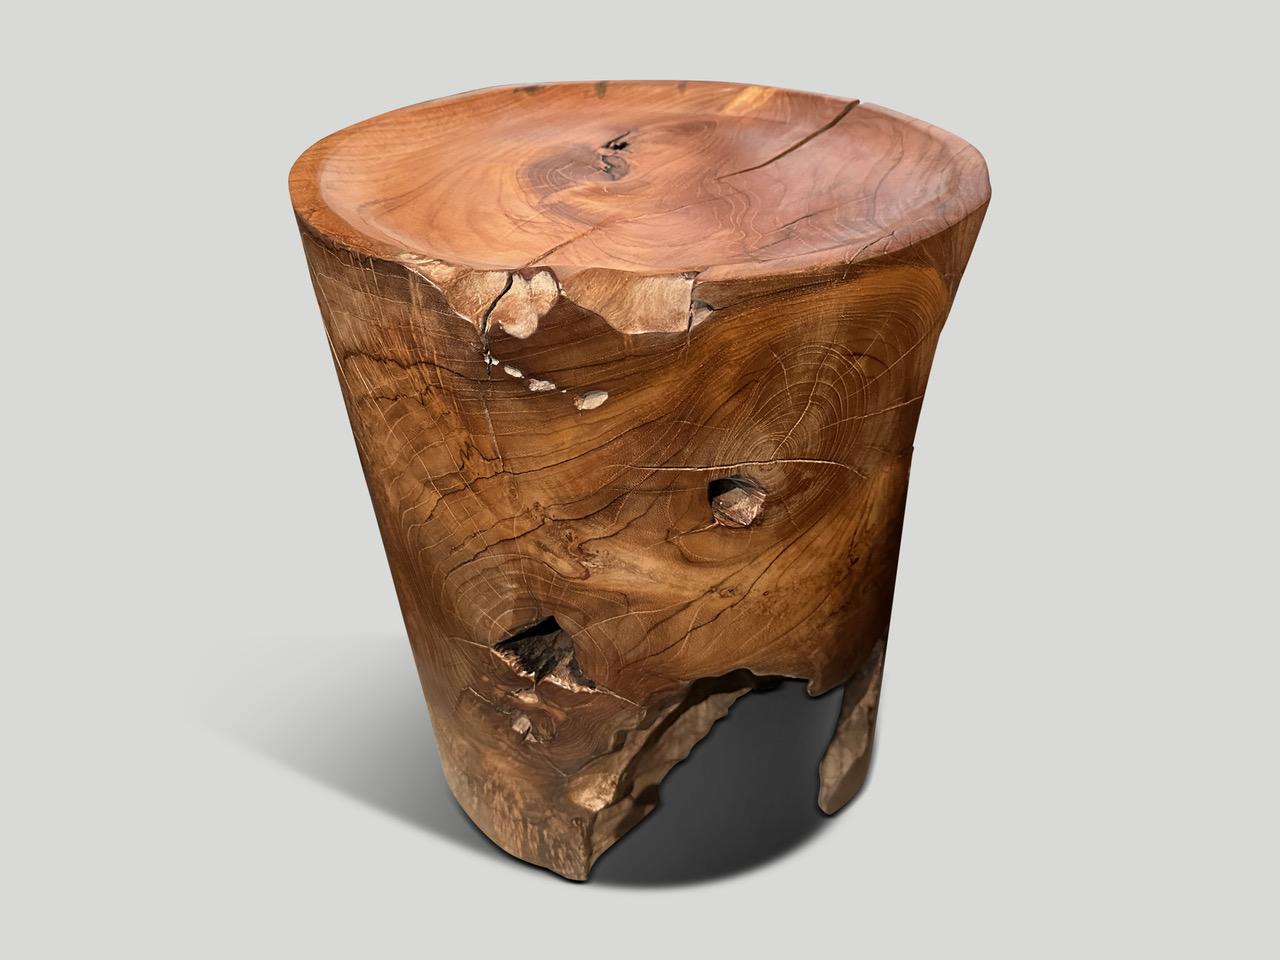 Natural organic formed reclaimed teak root side table. We hand carved the top section into a tray style and polished the aged teak with a natural oil revealing the beautiful wood grain. The inner sections are sanded and left unpolished in contrast.